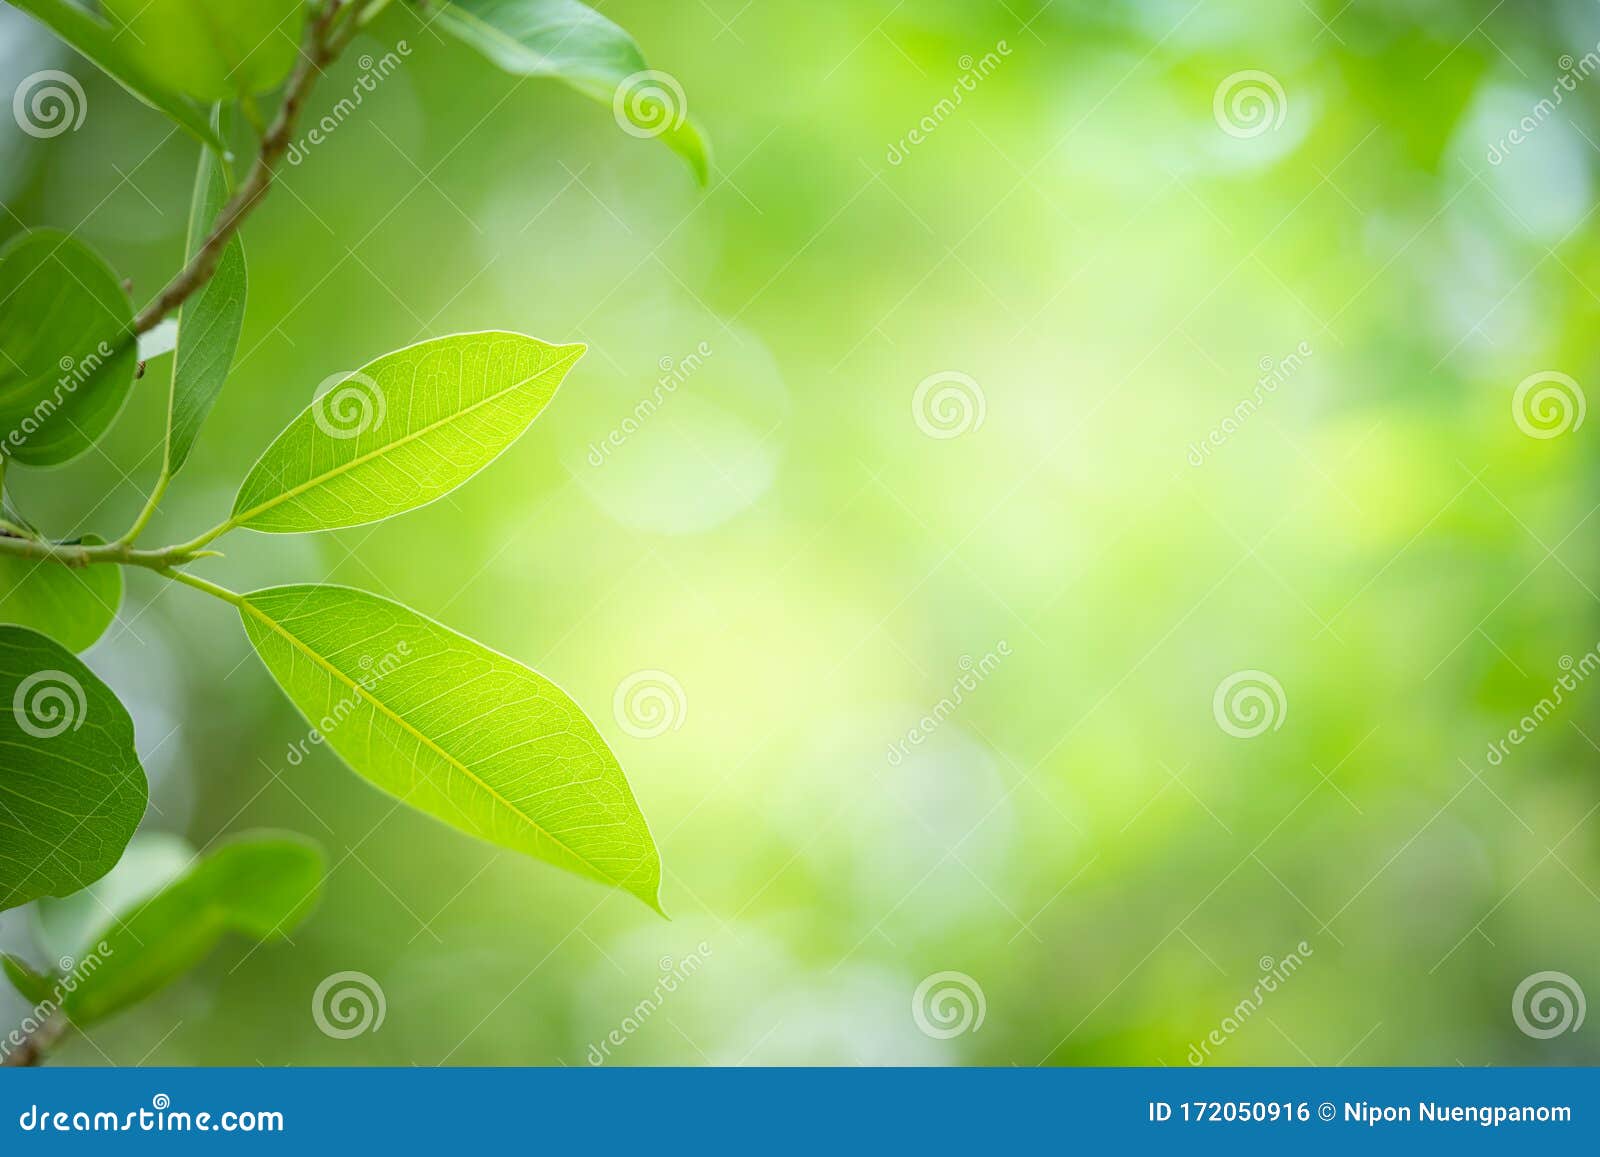 Nature View of Green Leaf on Greenery Blur Background Stock Photo - Image  of brilliant, beauty: 172050916